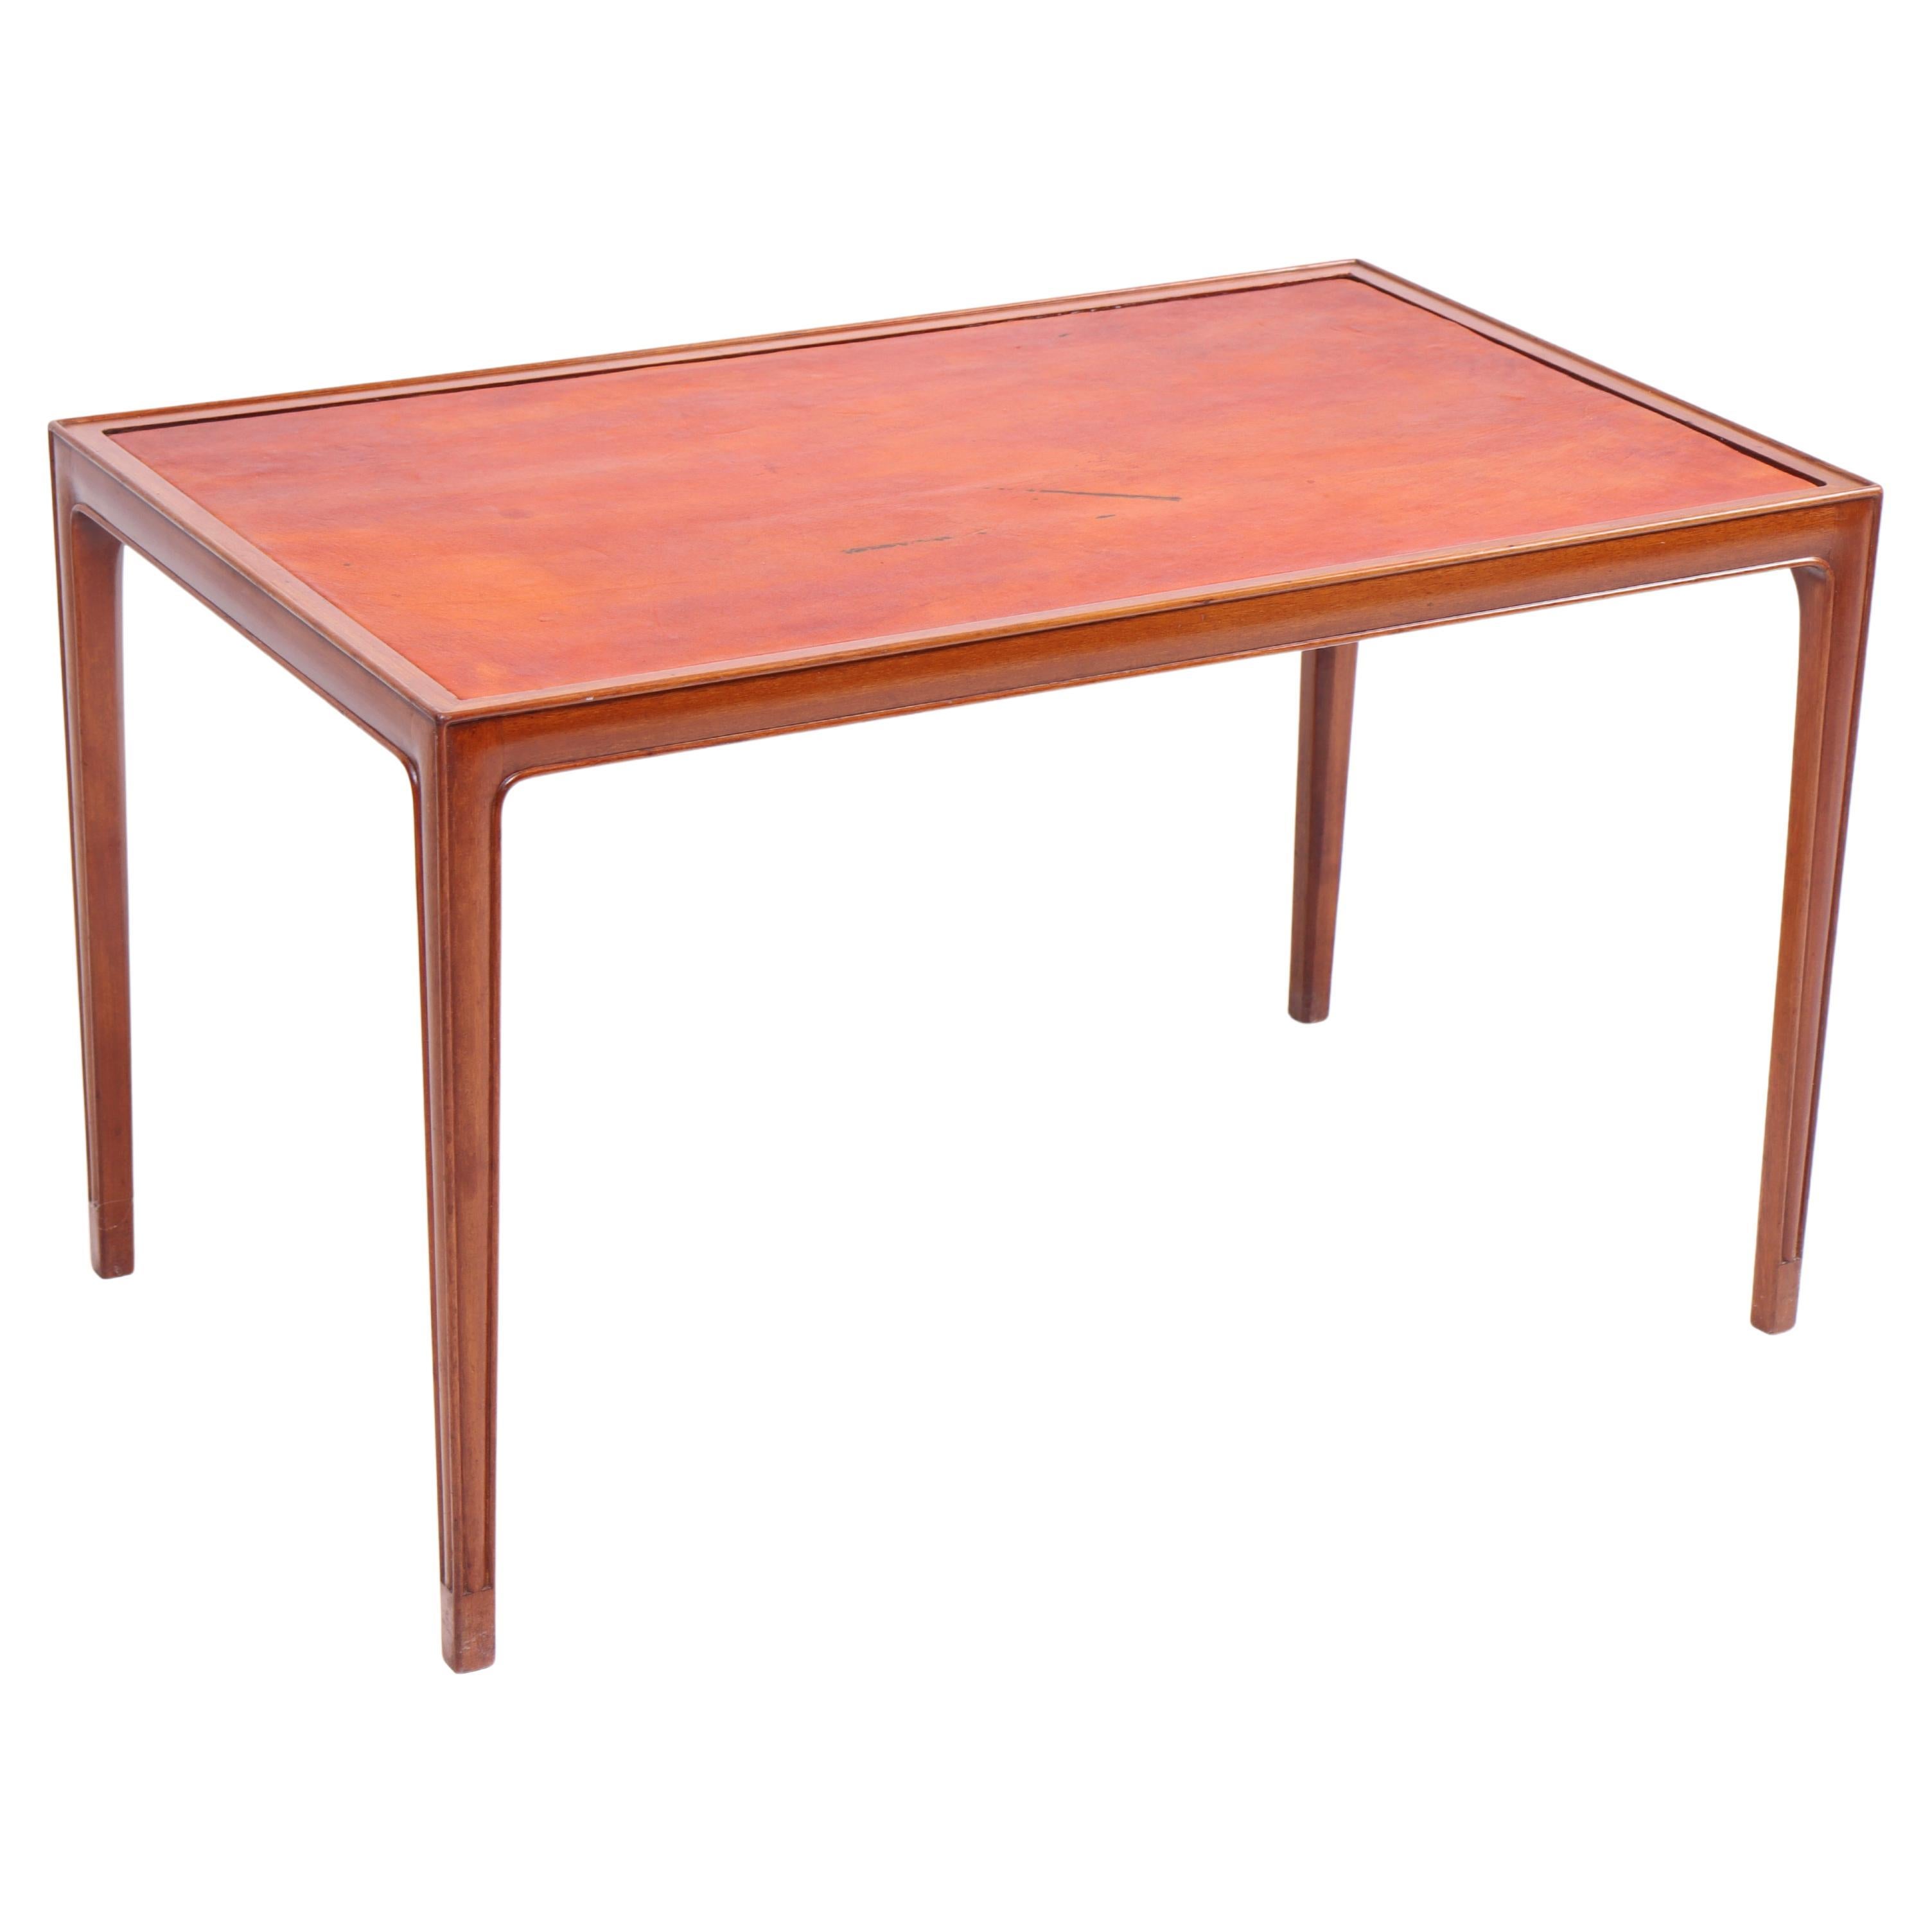 Low Table in Mahogany and Patinated Leather, Danish Cabinetmaker 1950s